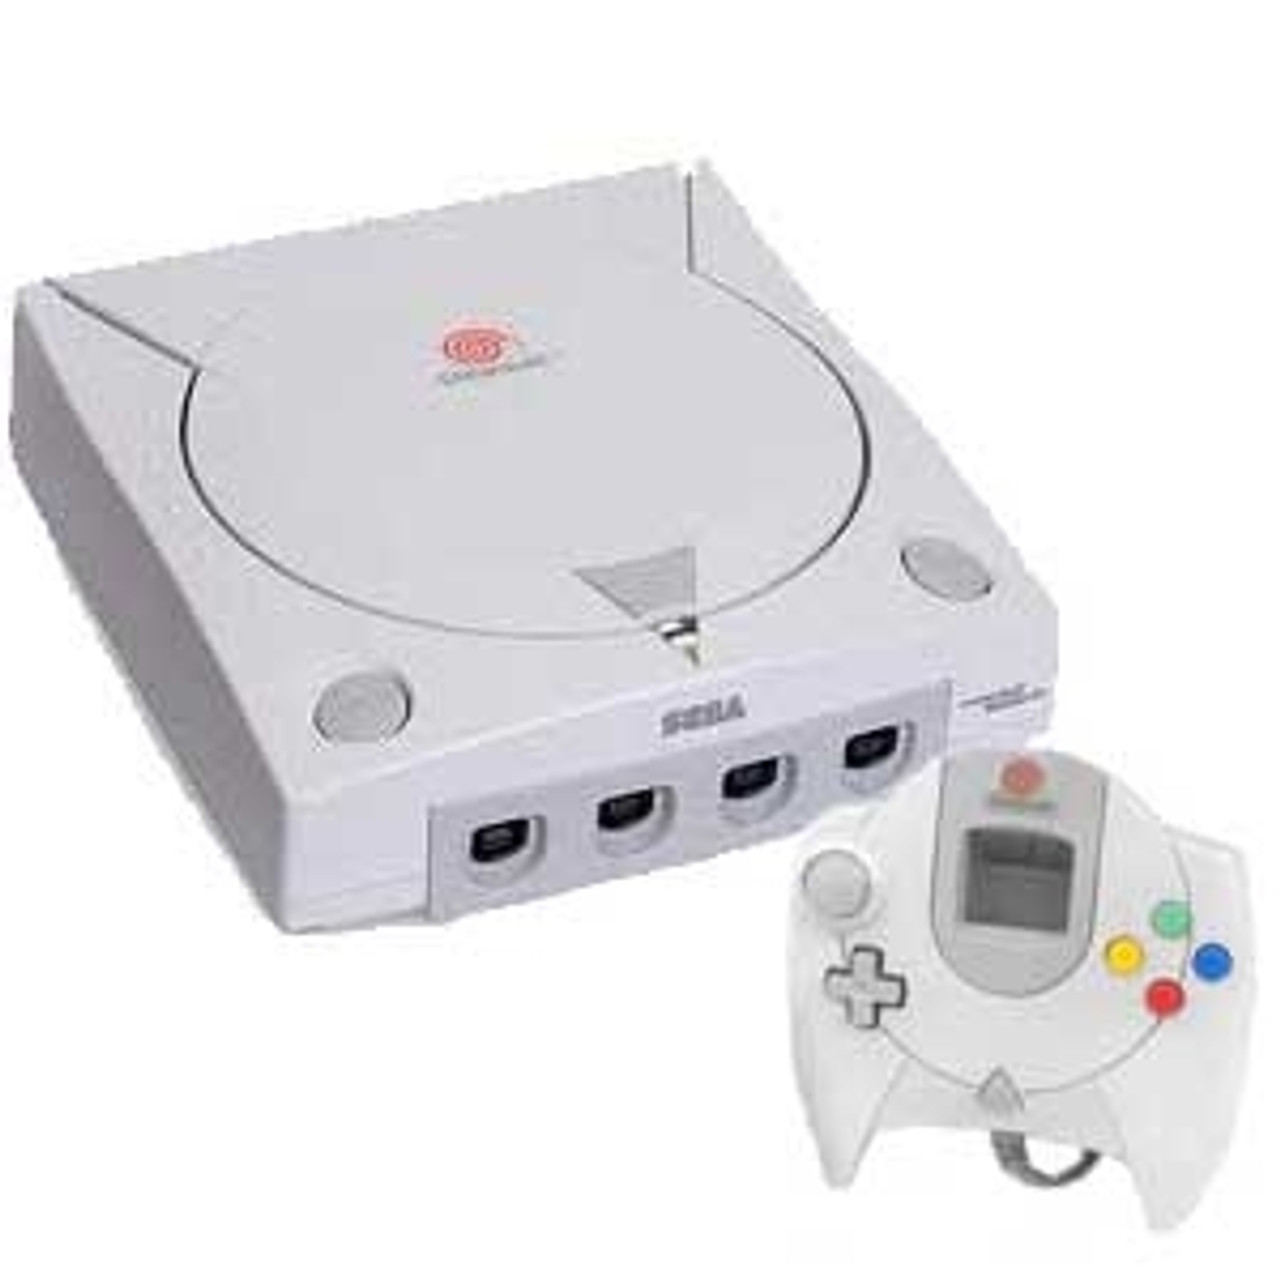 Dreamcast System Pack Console For Sale